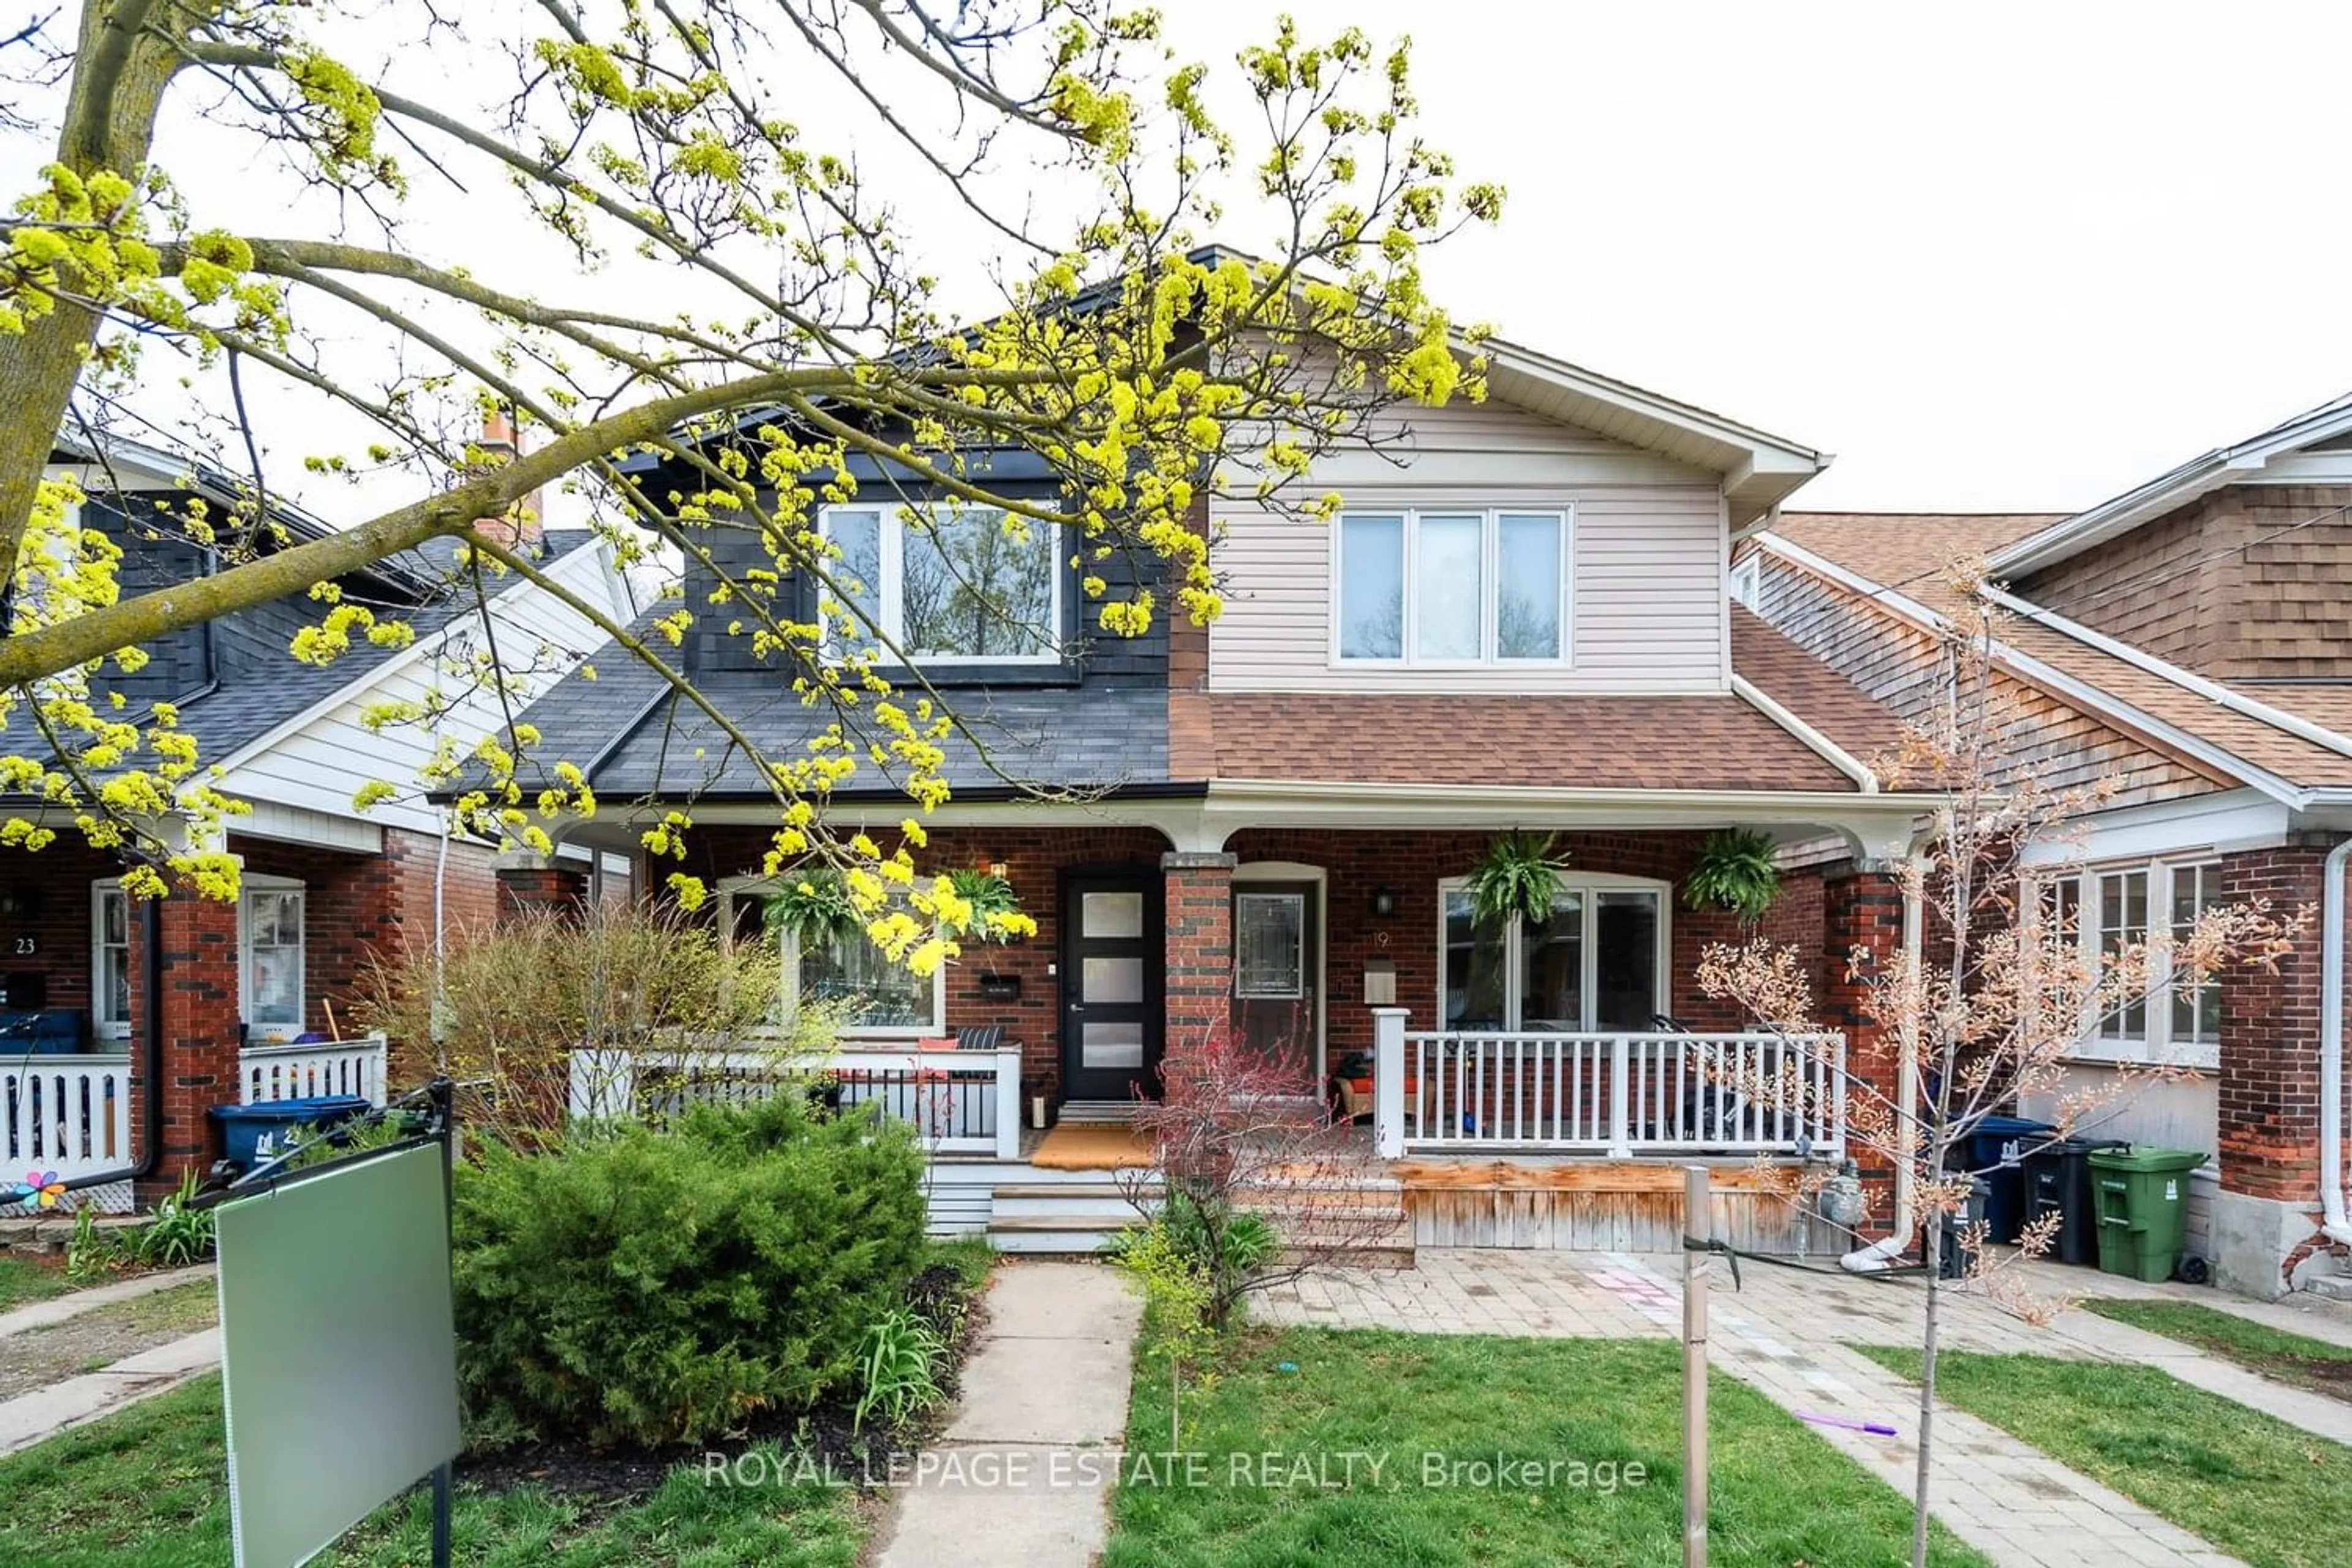 Home with brick exterior material for 21 Haslett Ave, Toronto Ontario M4L 3R1